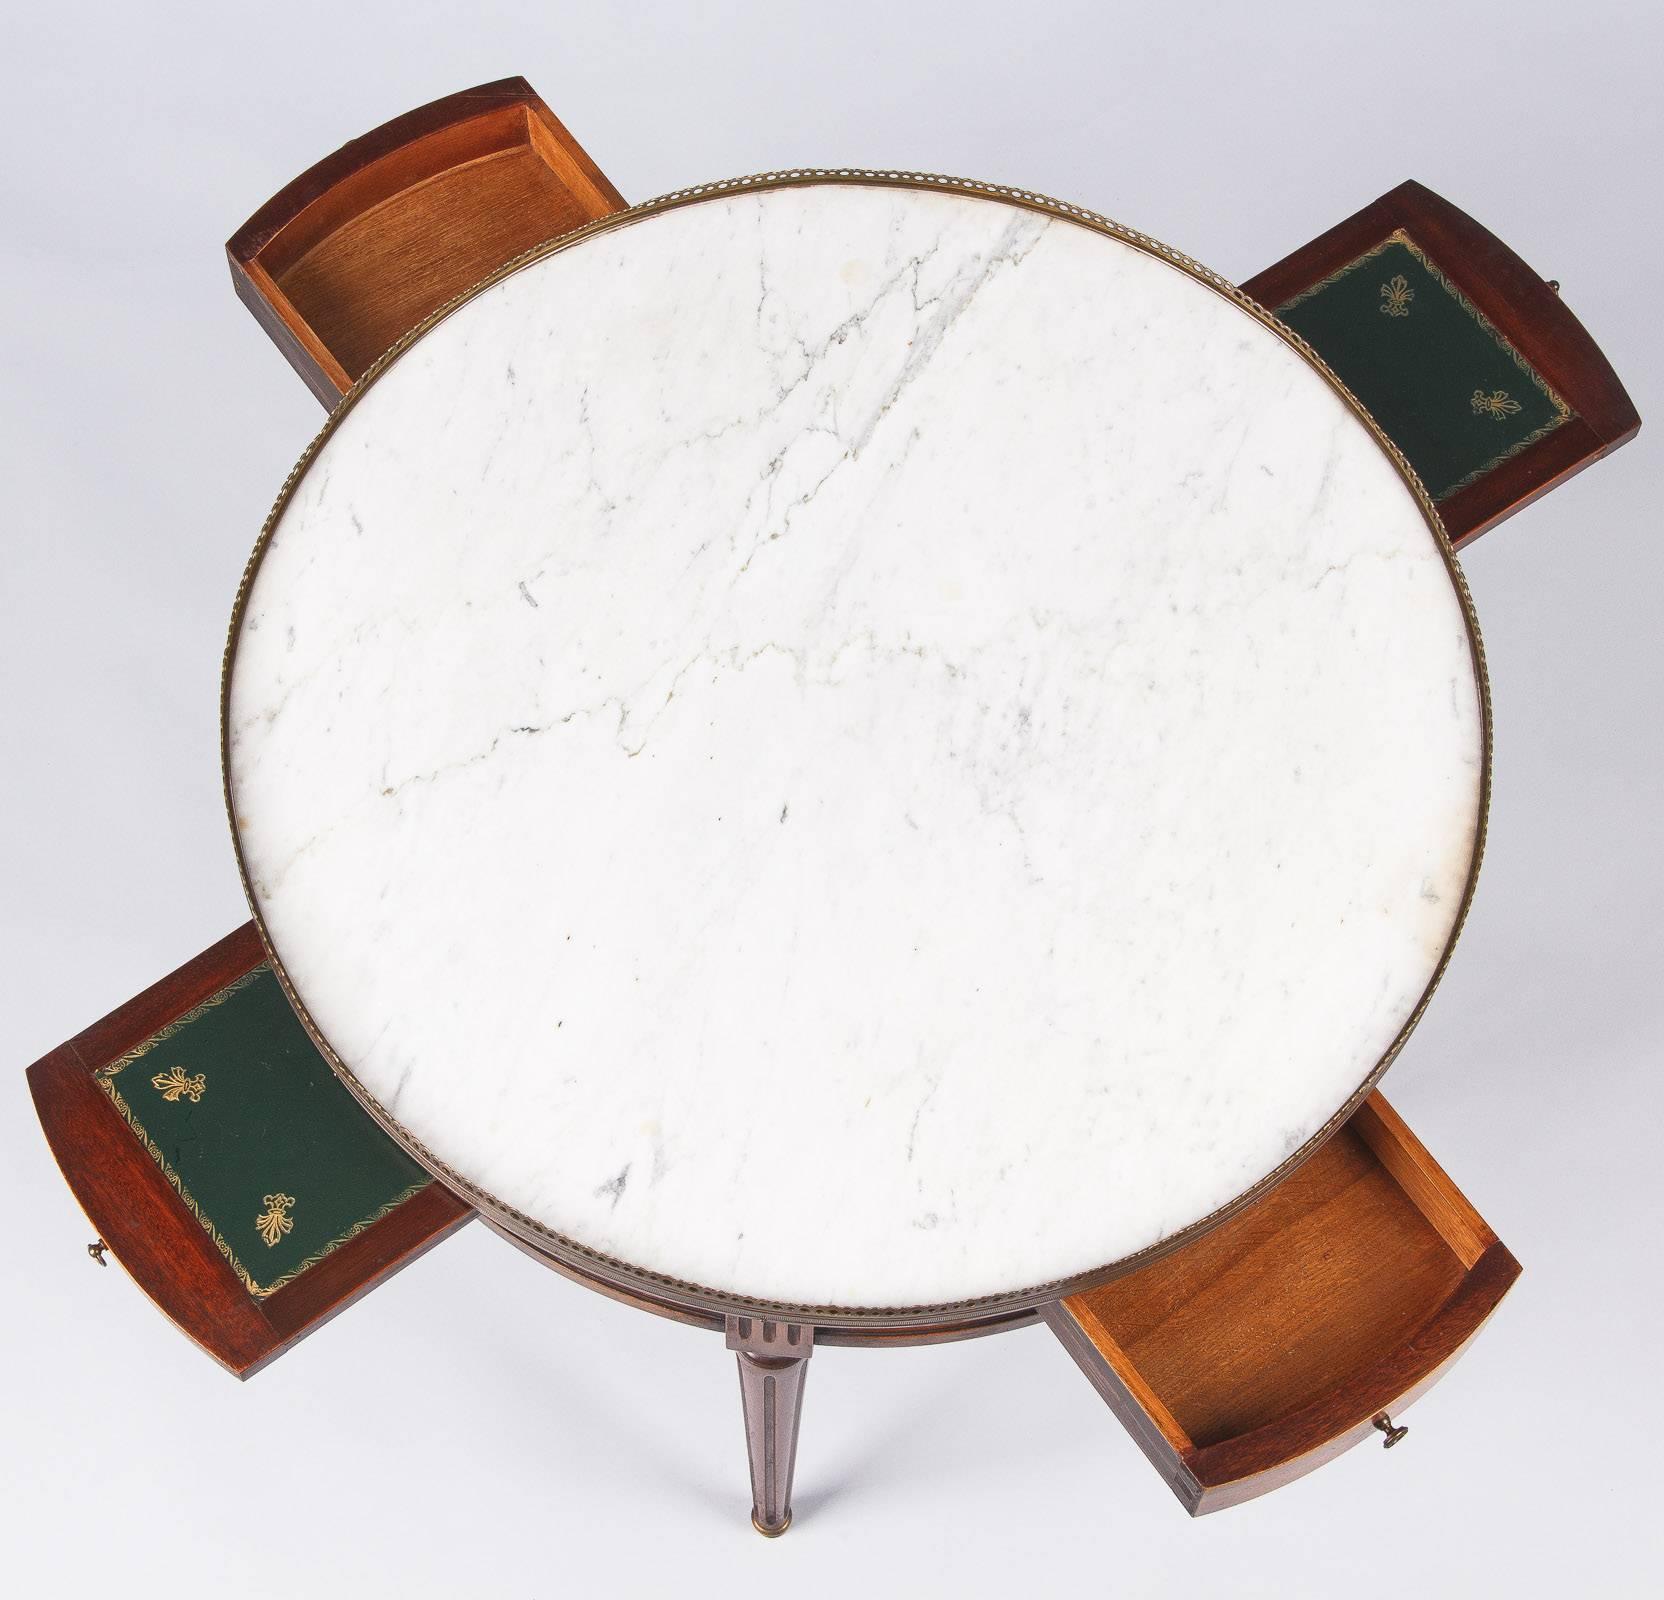 A very attractive Louis XVI style "Bouillotte" coffee or side table made of cherrywood and topped with a white Carrara marble surrounded by a pierced brass gallery. The apron has two drawers with brass pulls and two pull-out shelves made